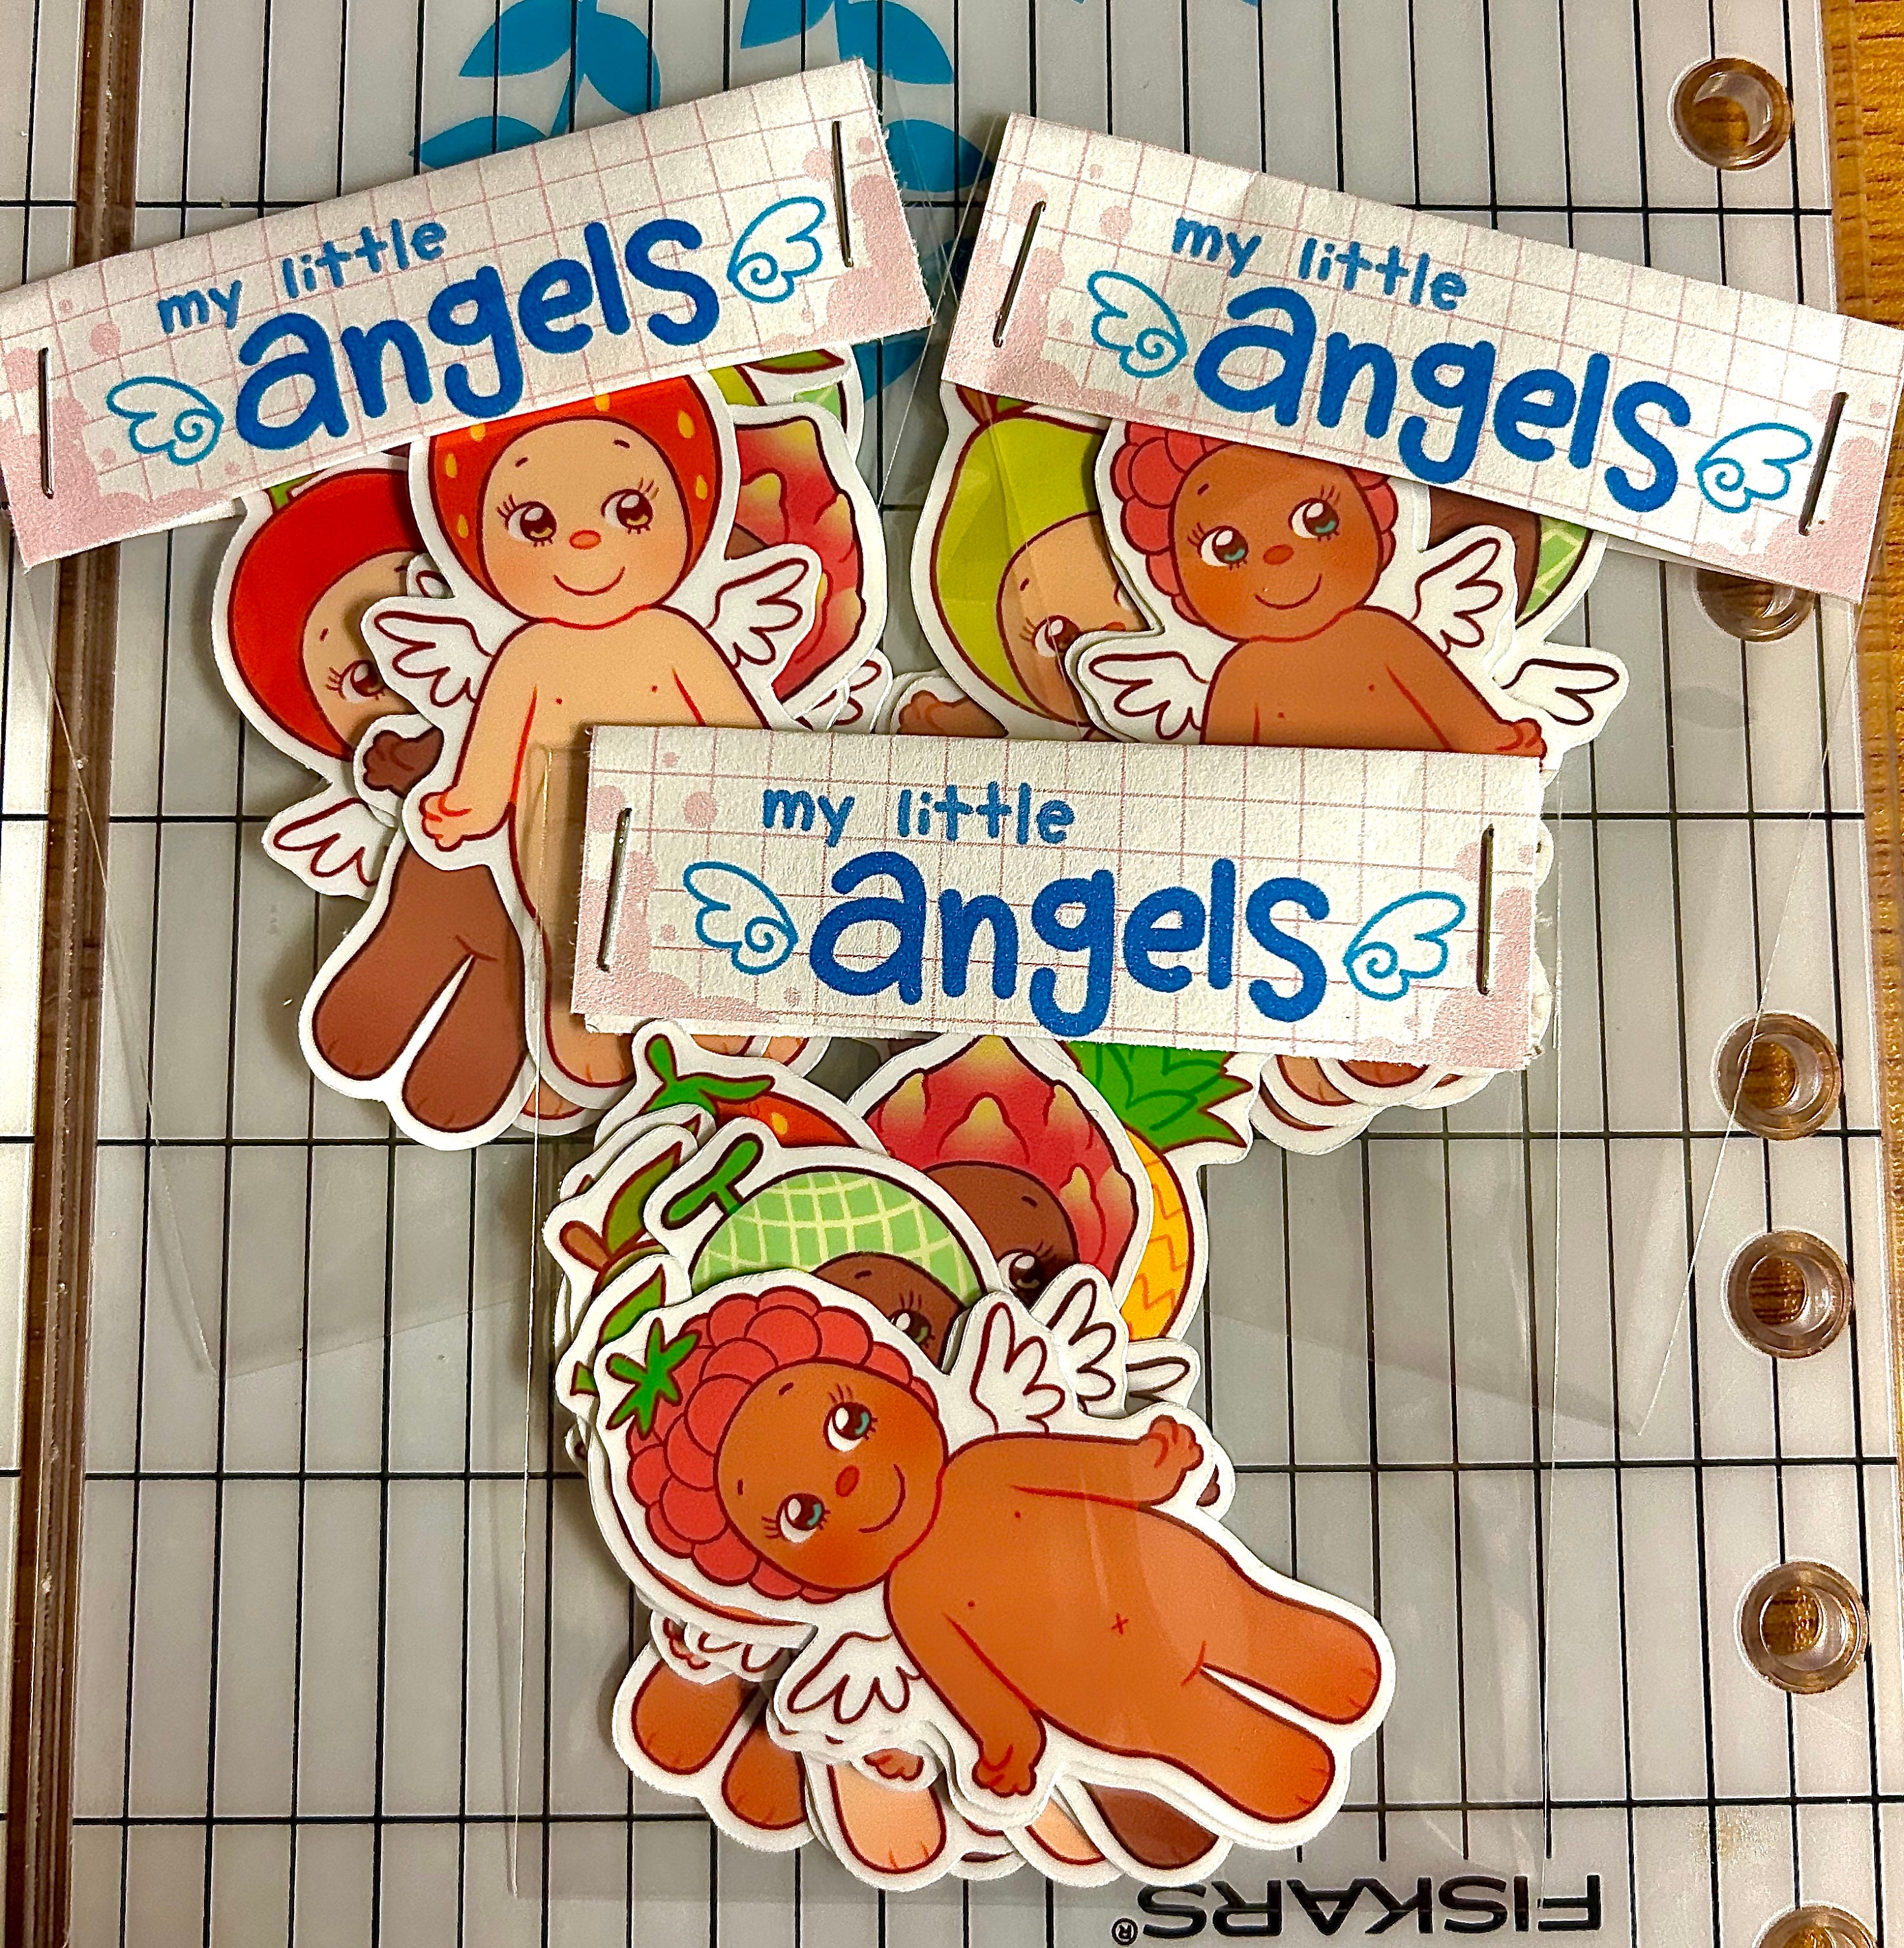 Sonny Angel Stickers, Waterproof Holo Vinyl Sticker Pack and Sheet, Tiny  Angels Series, PLCREATES